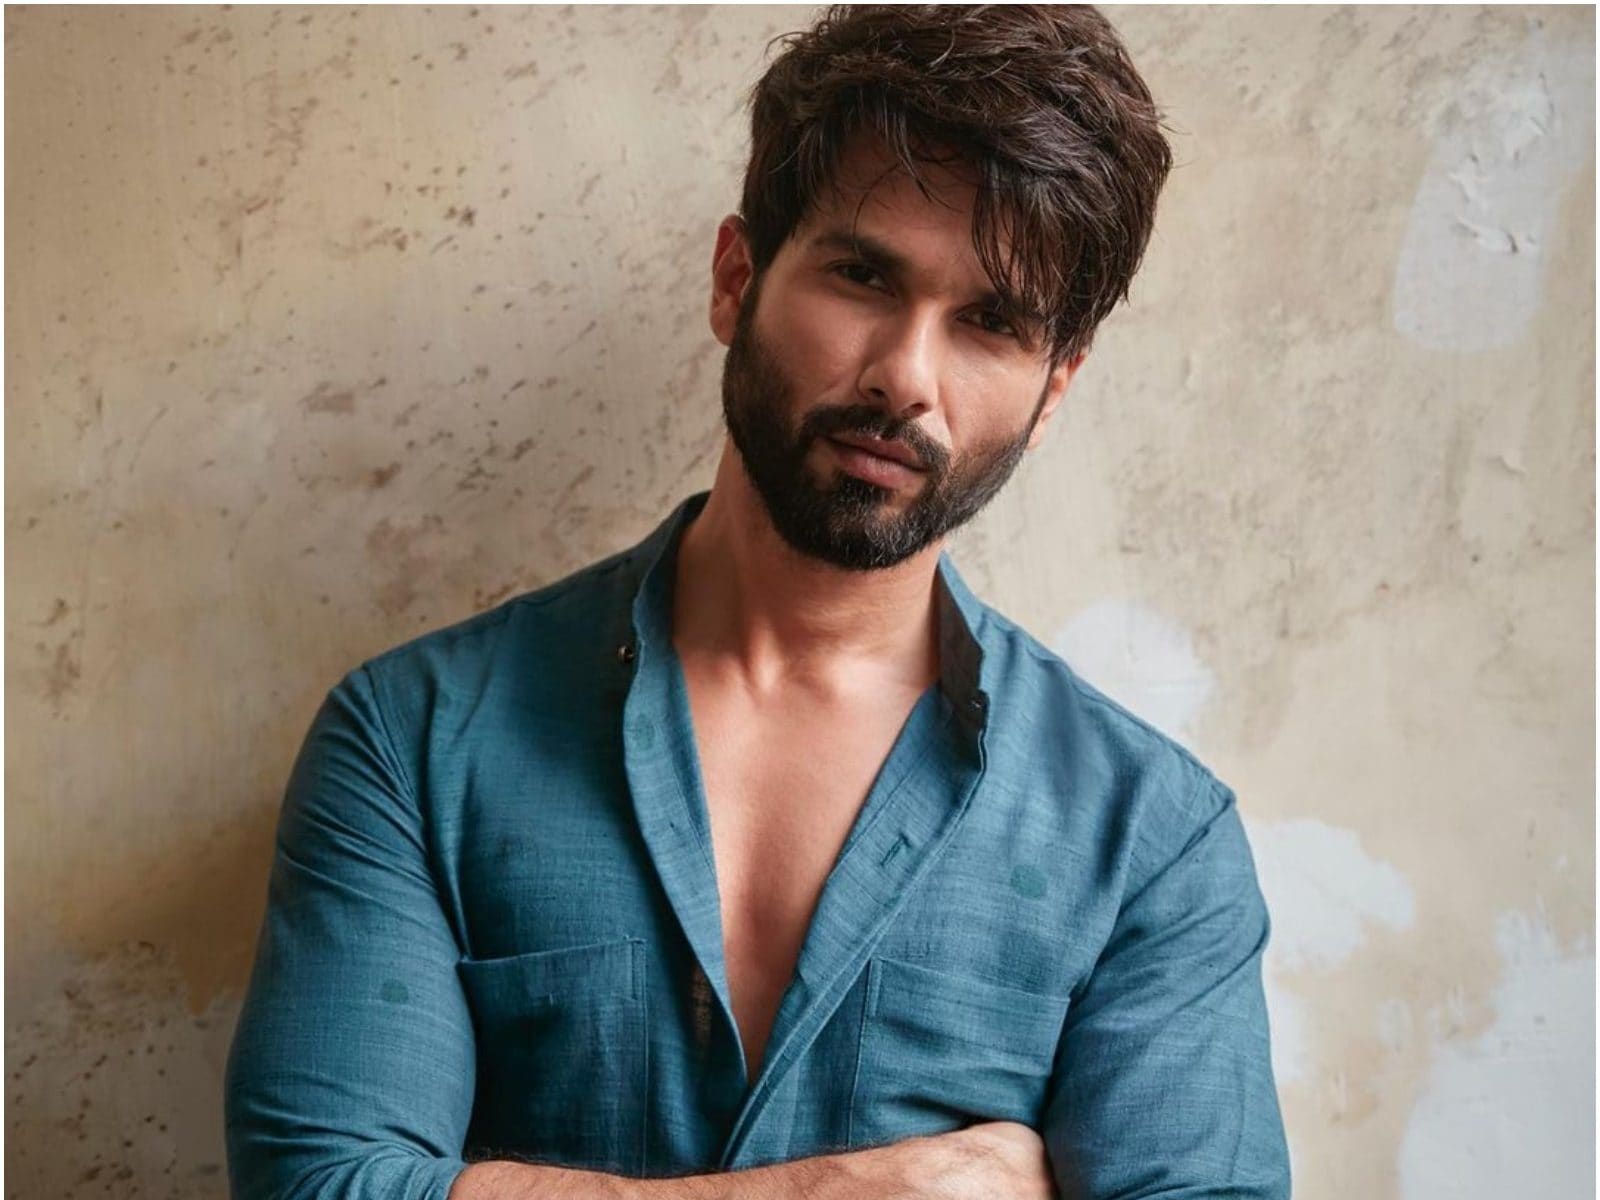 Shahid Kapoor looks dapper in all-black outfit at IIFA 2019 green carpet